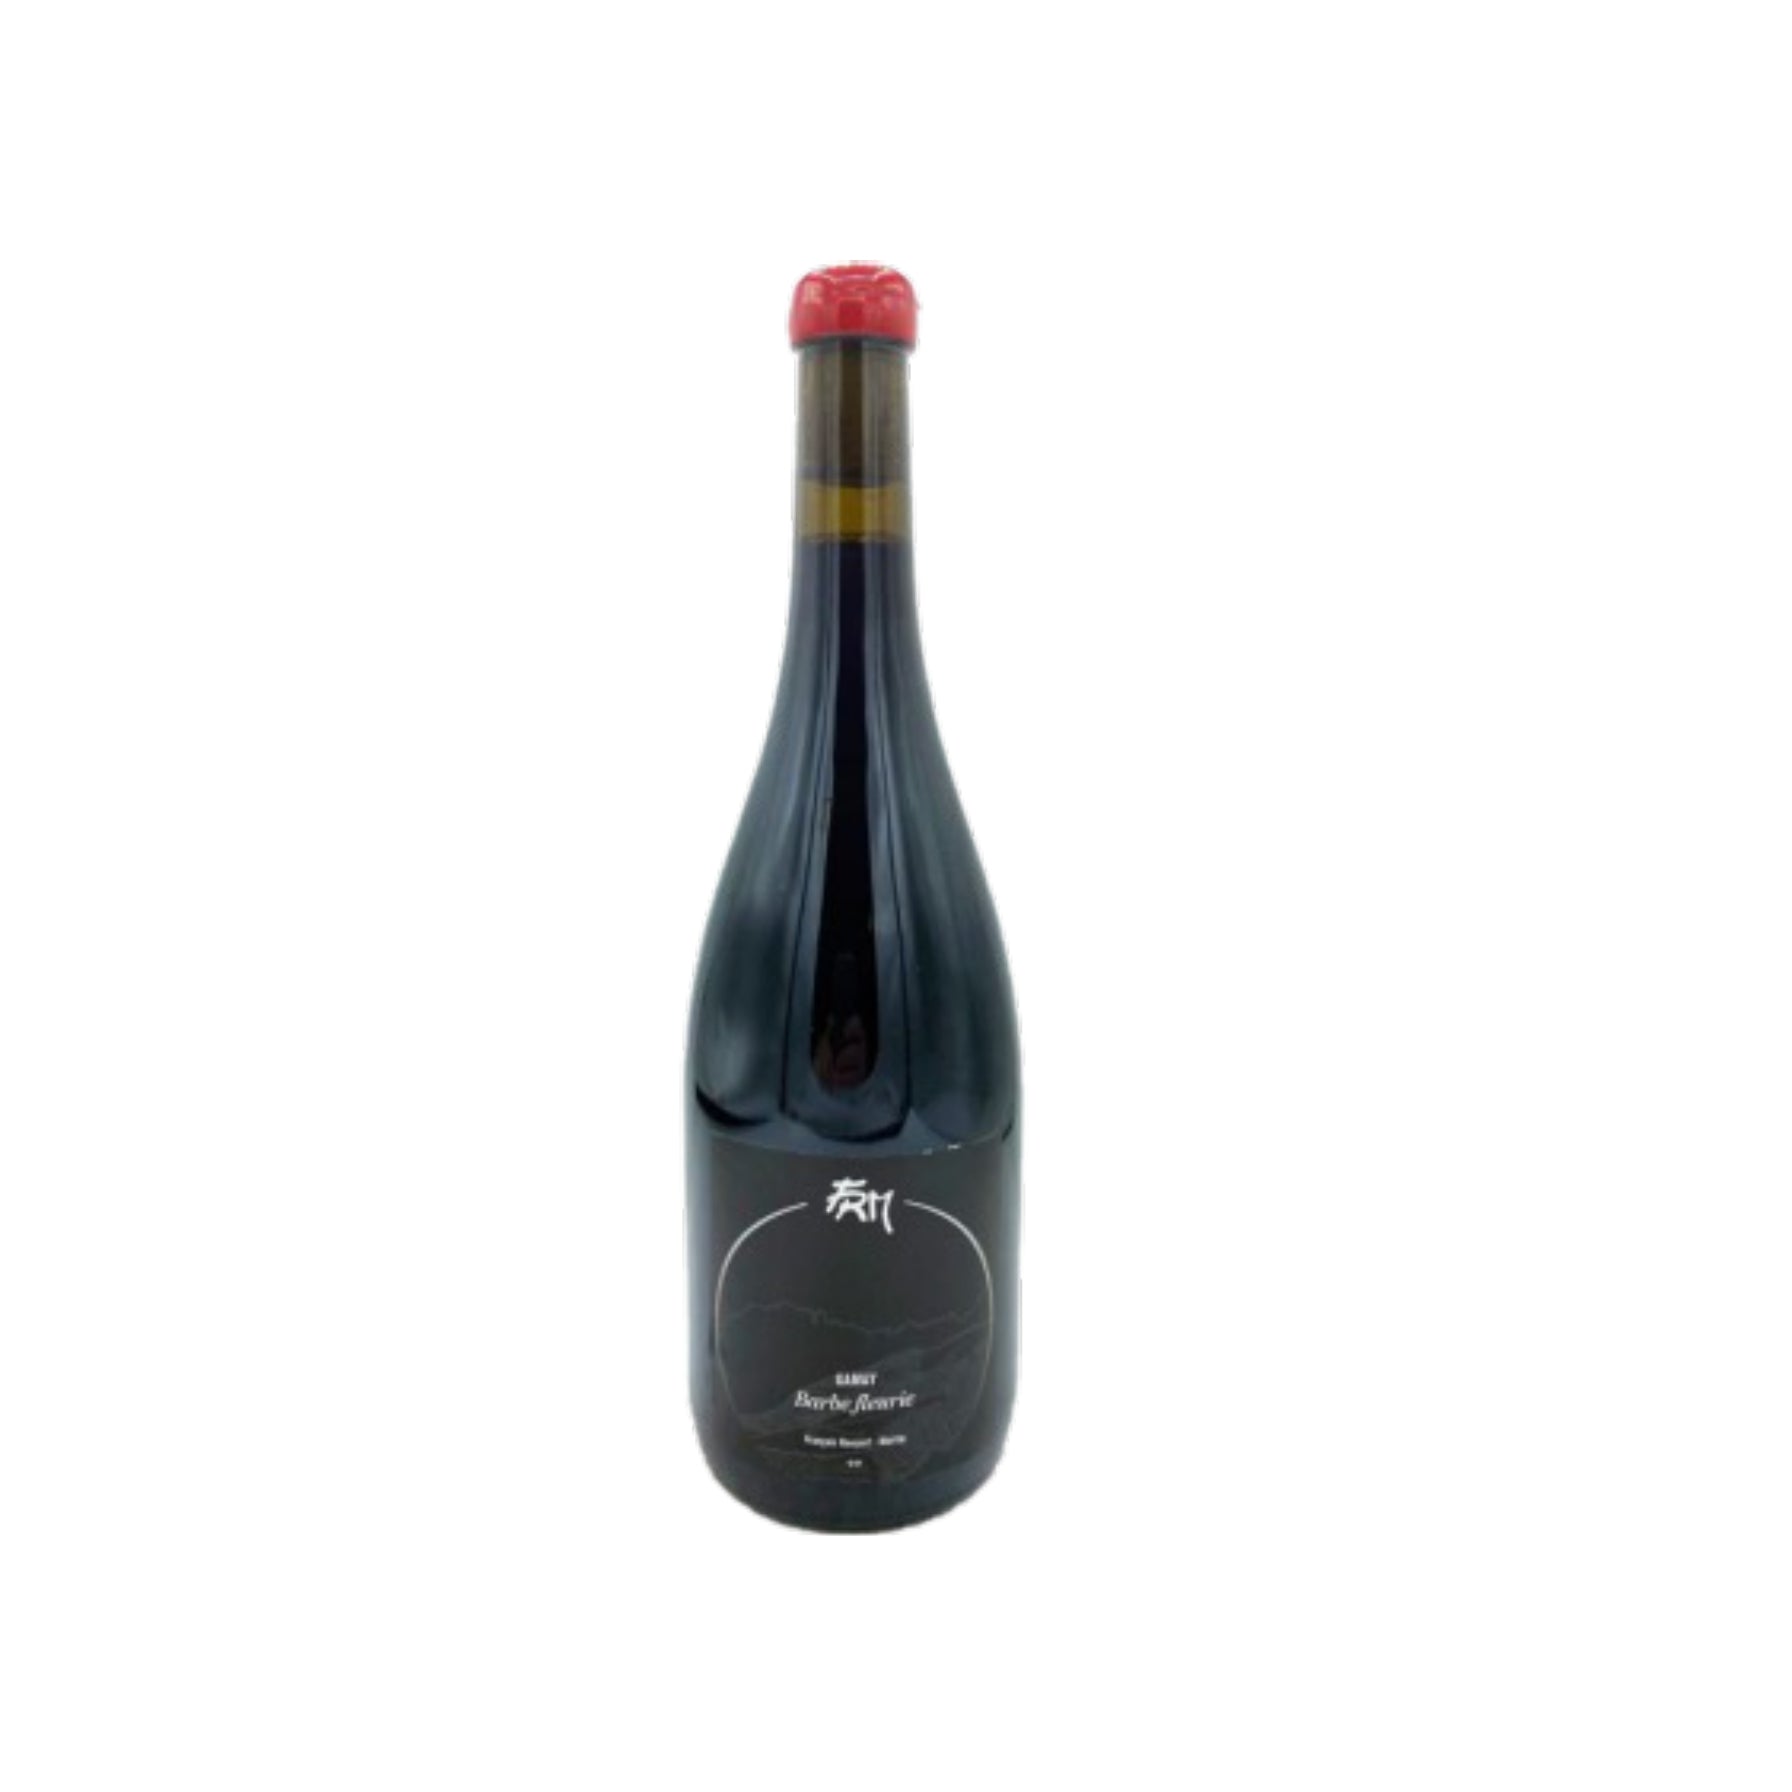 Domaine FRANCOIS ROUSSET-MARTIN Gamay "Barbe Fleurie" 2021